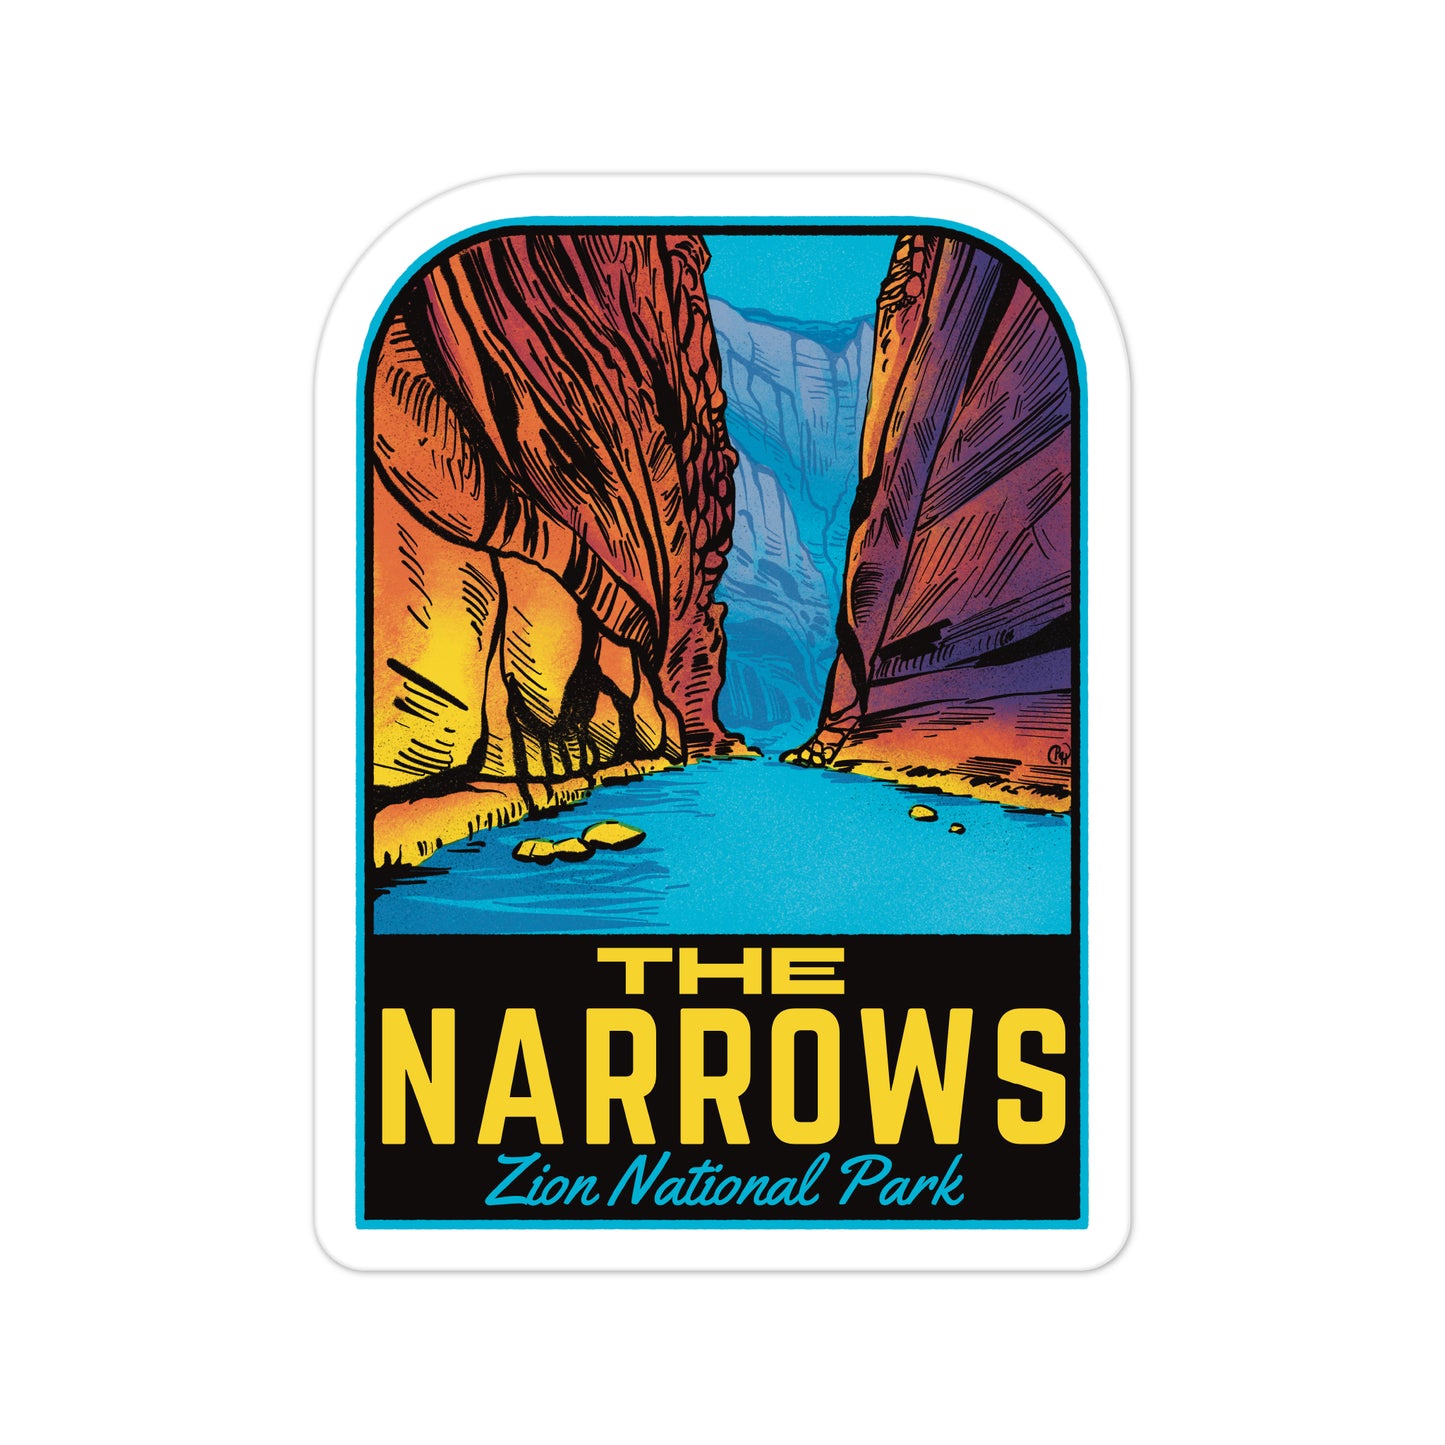 A sticker of The Narrows Zion National Park